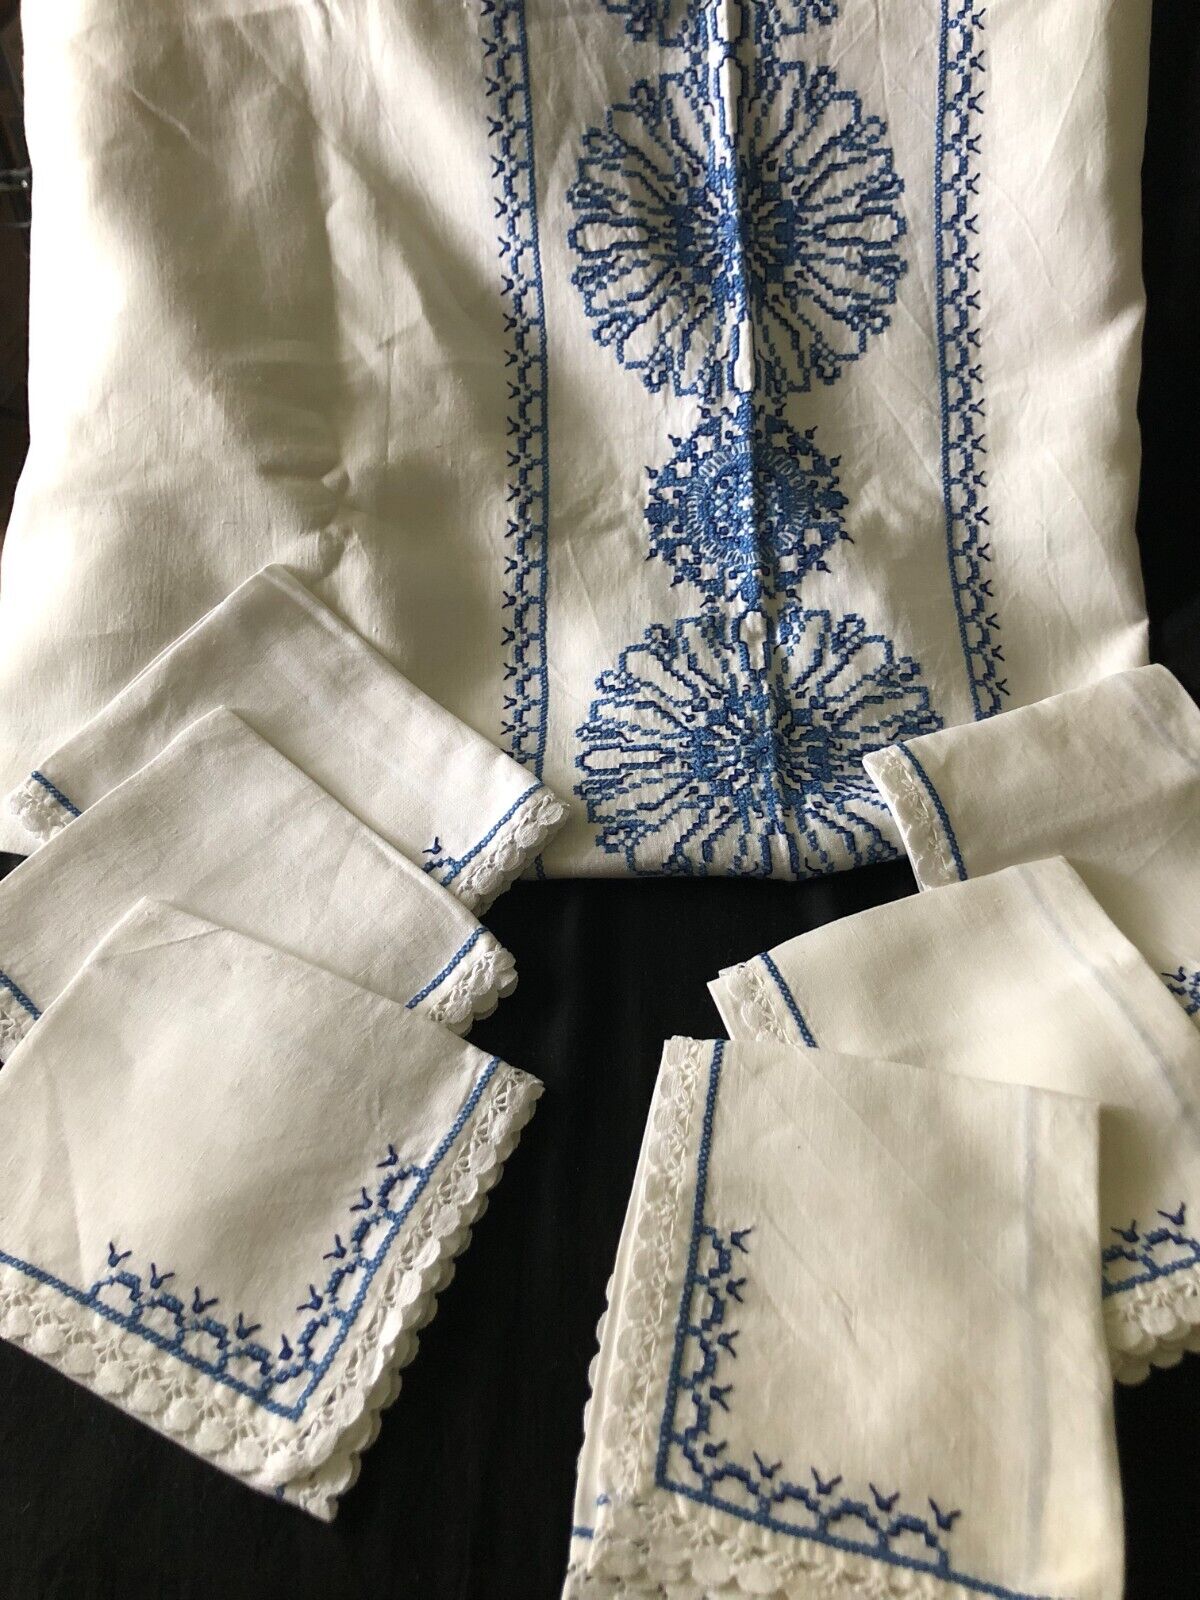 Stunning Vintage French Blue White Cross Stitch Linen Tablecloth 6 Napkins 5x6FT